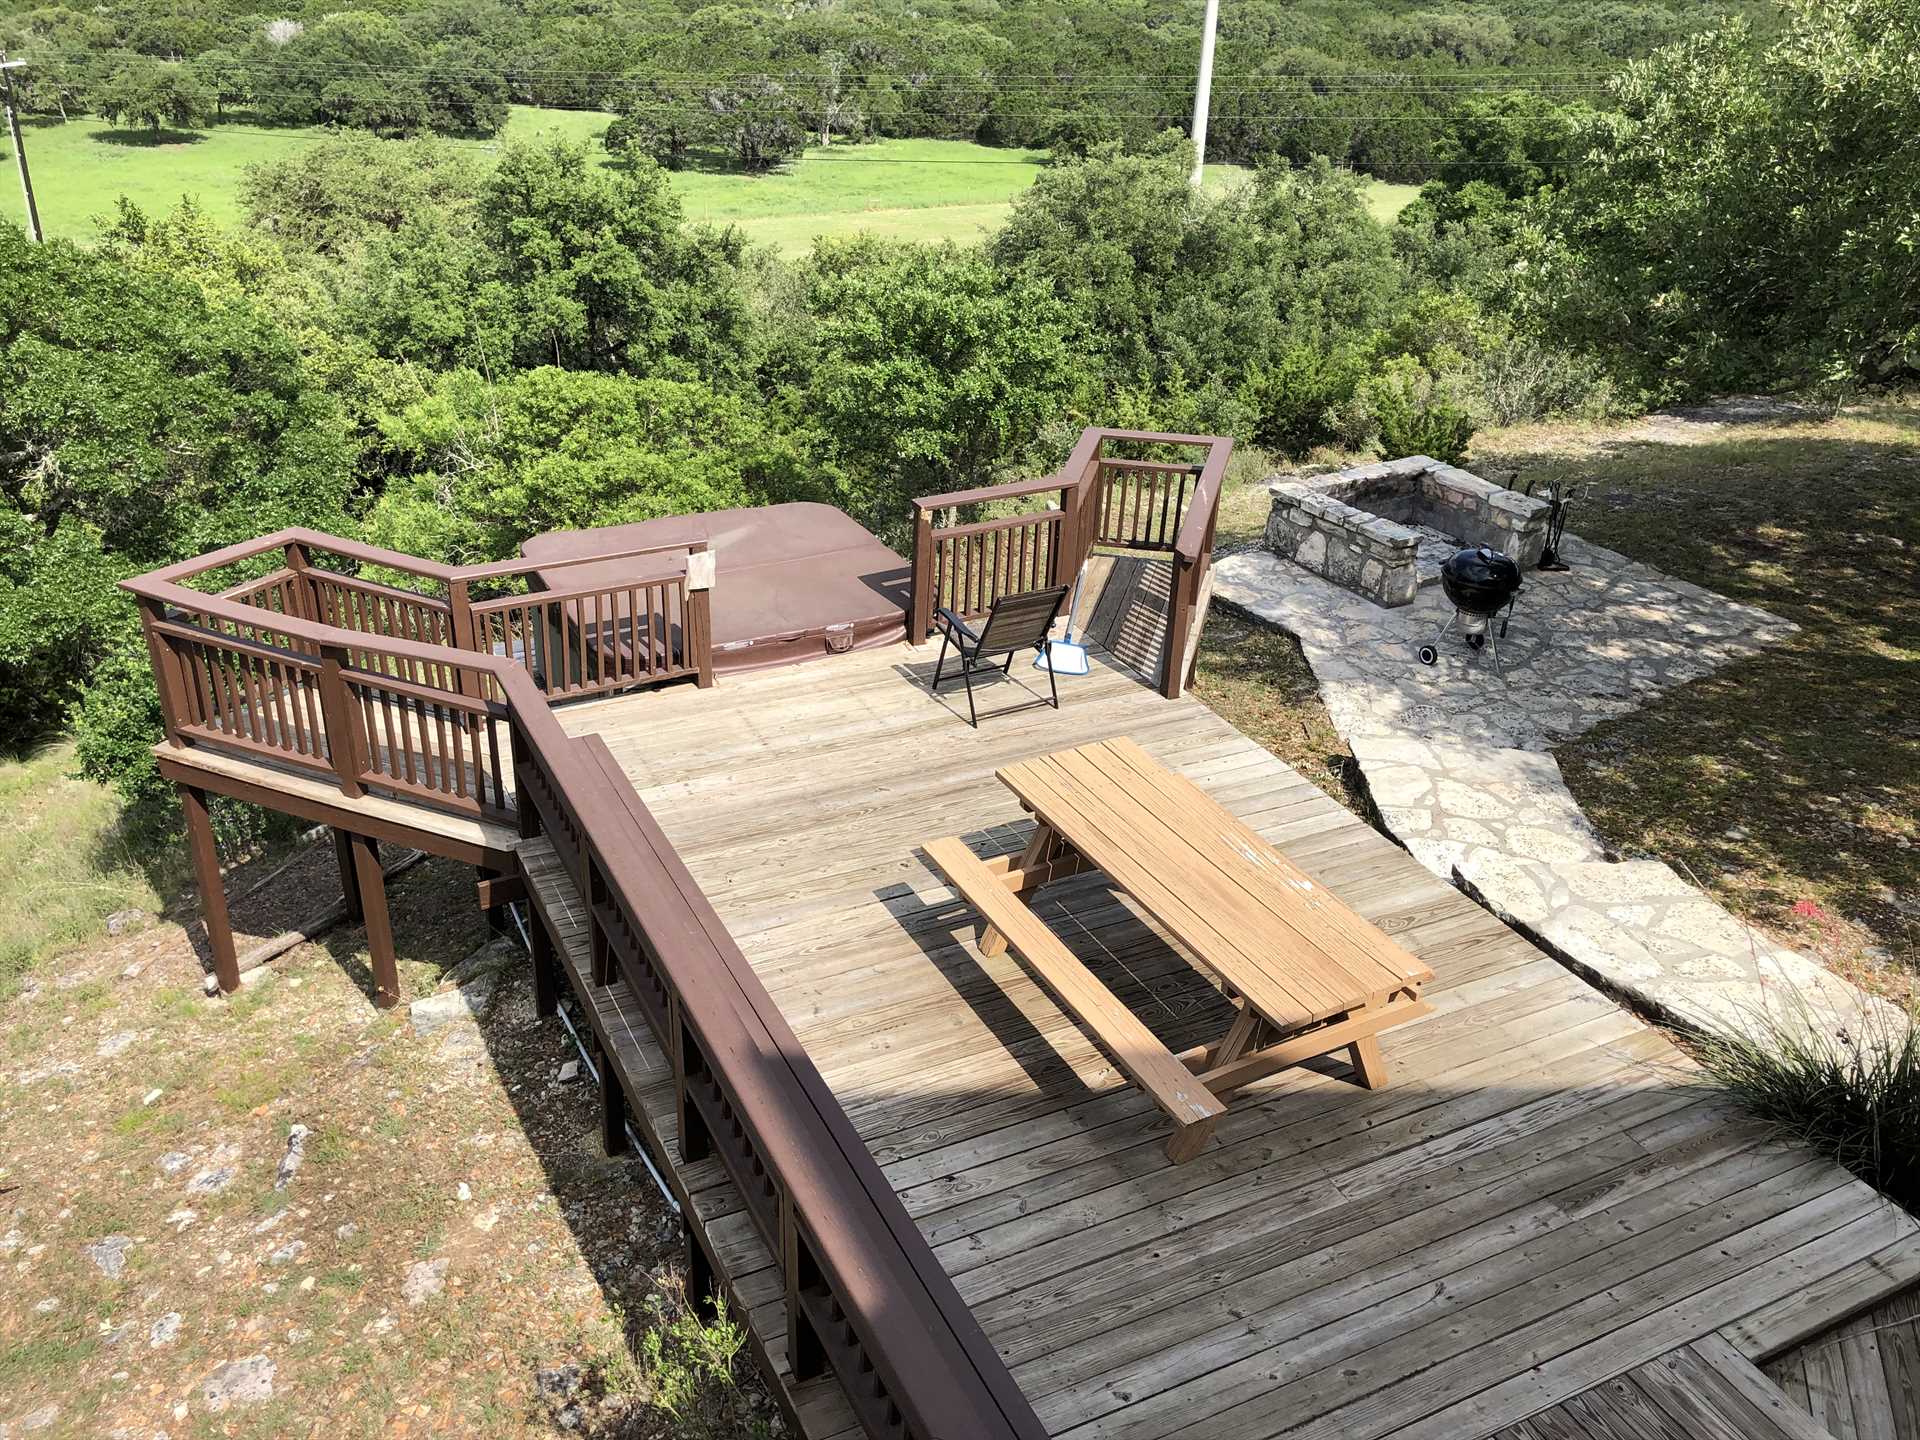                                                 Let's see...fire pit, charcoal grill, plenty of seating, a hot tub, and eye-popping Hill Country views. You may never want to leave the deck!